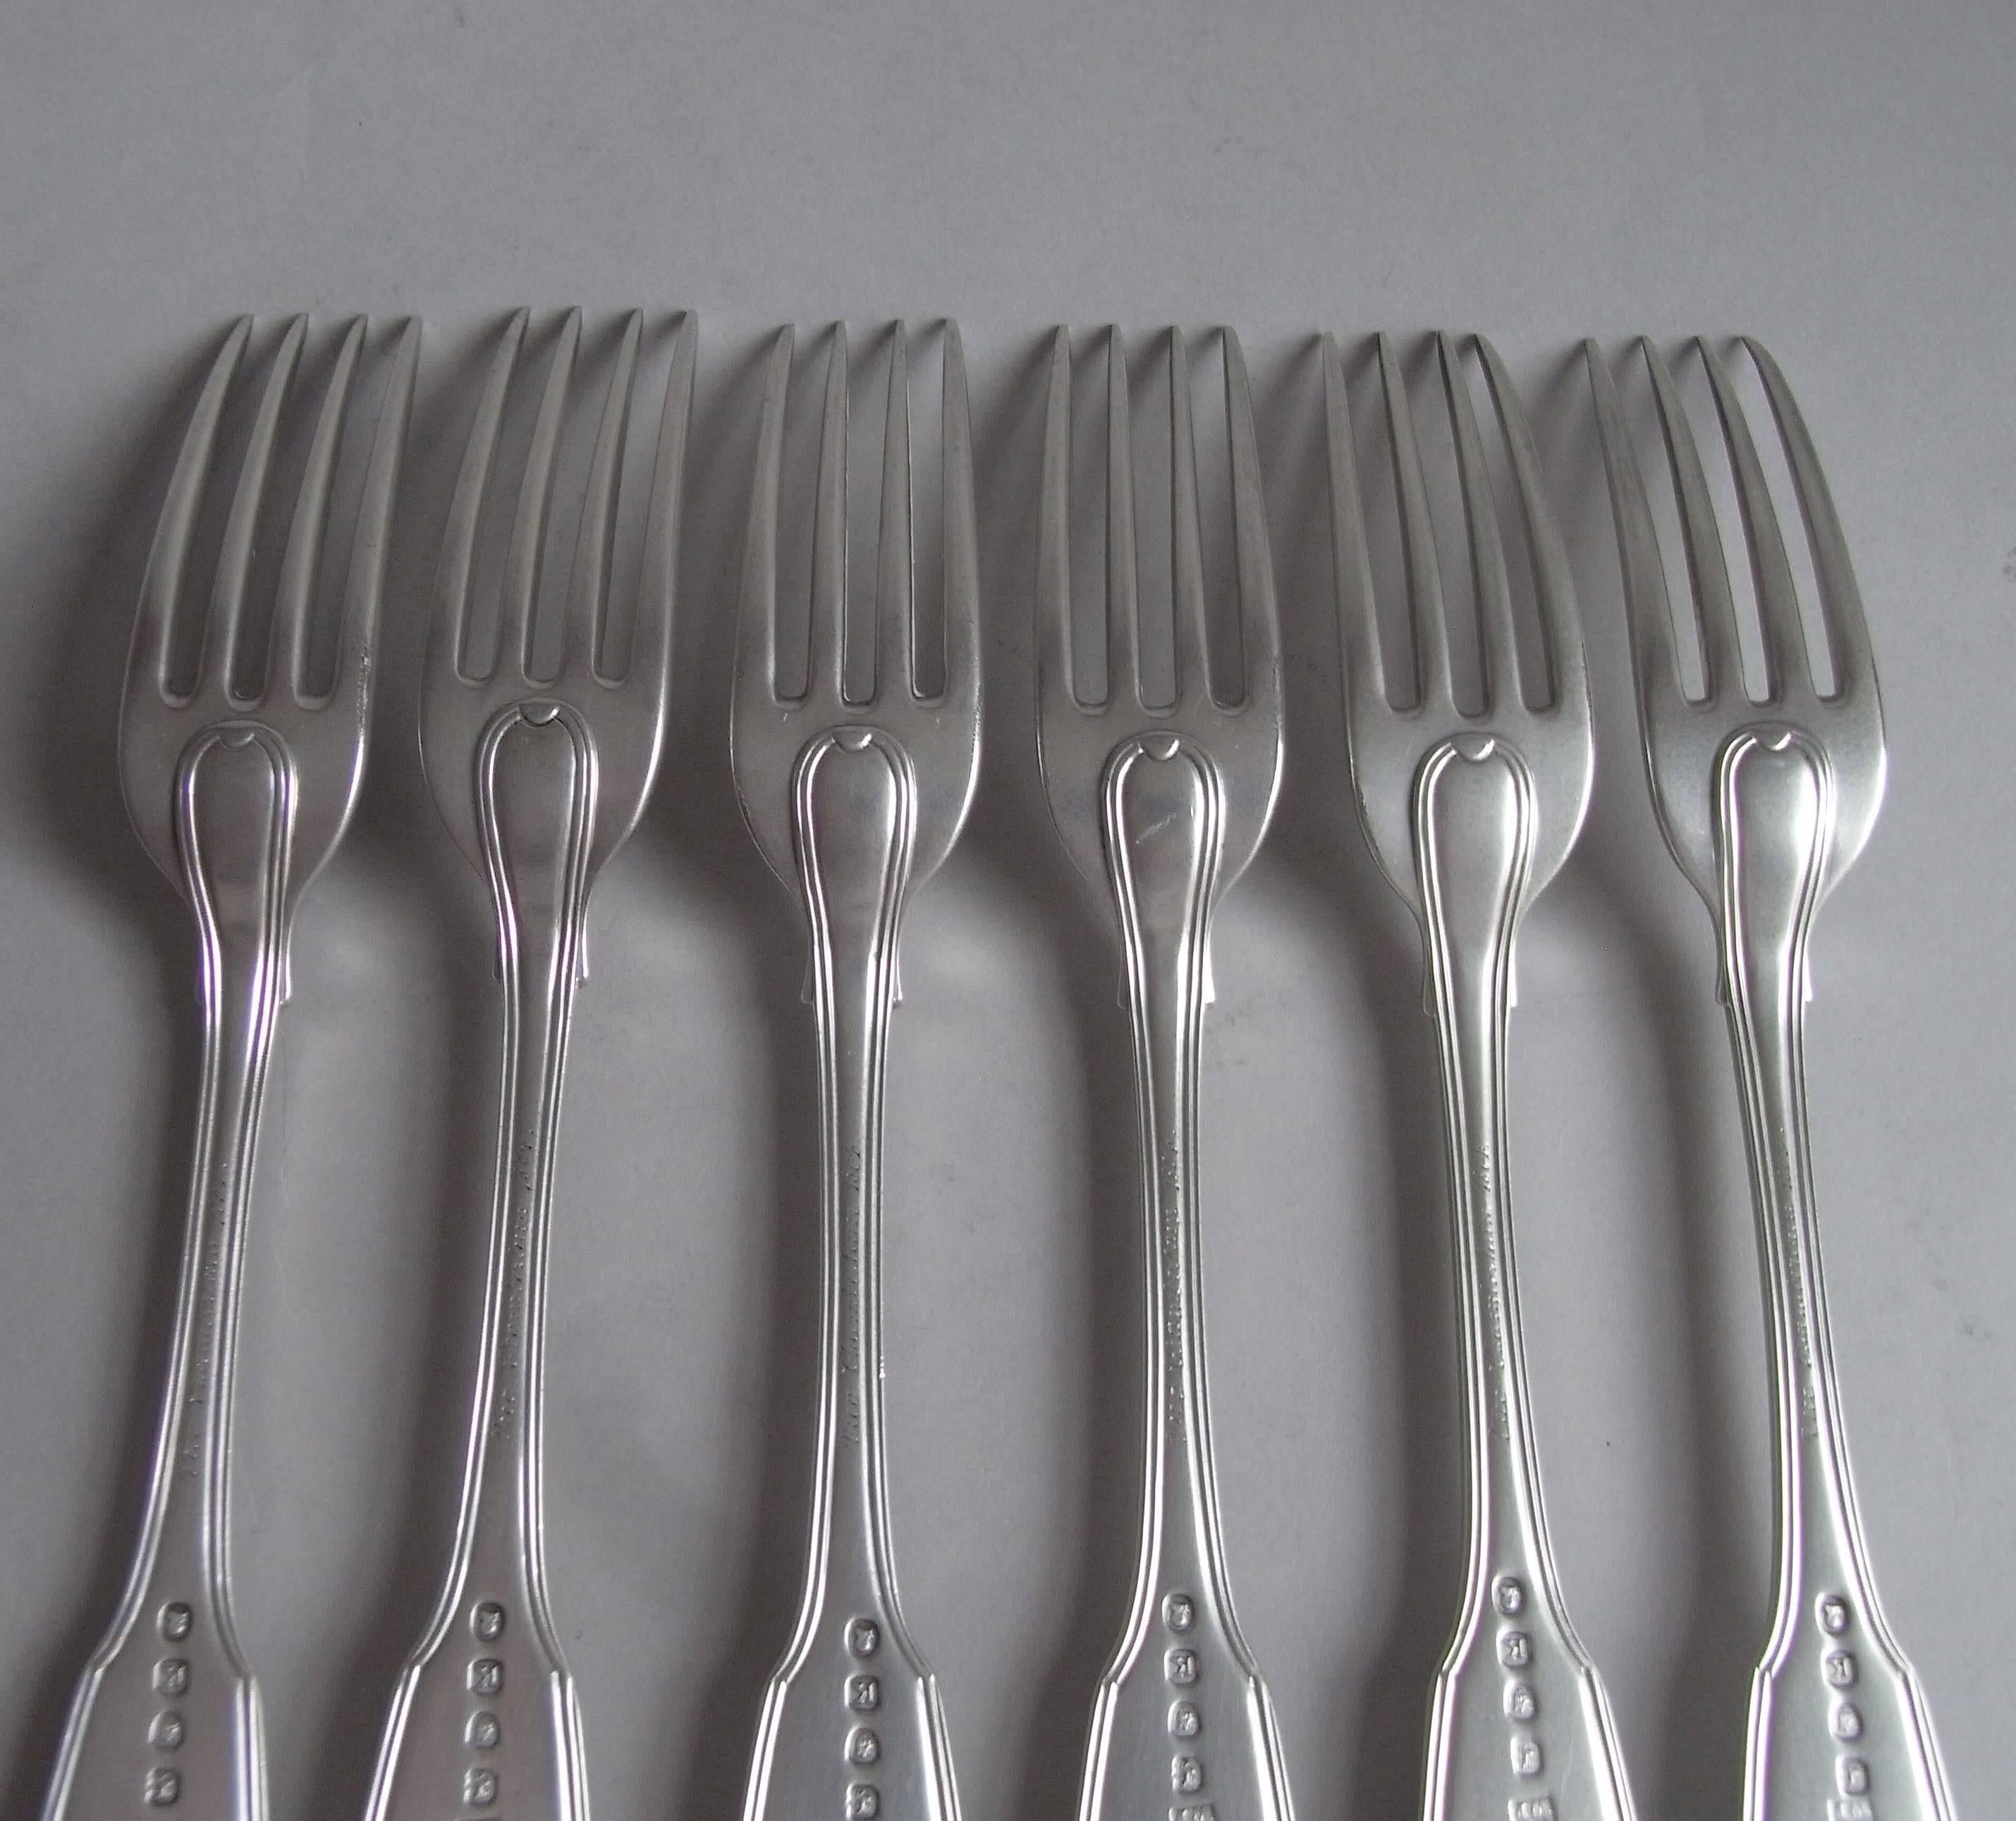 These very fine table forks are modelled in the fiddle and thread pattern and are double struck. Each is very well marked and are of a very good weight and gauge of silver. The top of each stem is engraved with the Royal Arms as used by King George